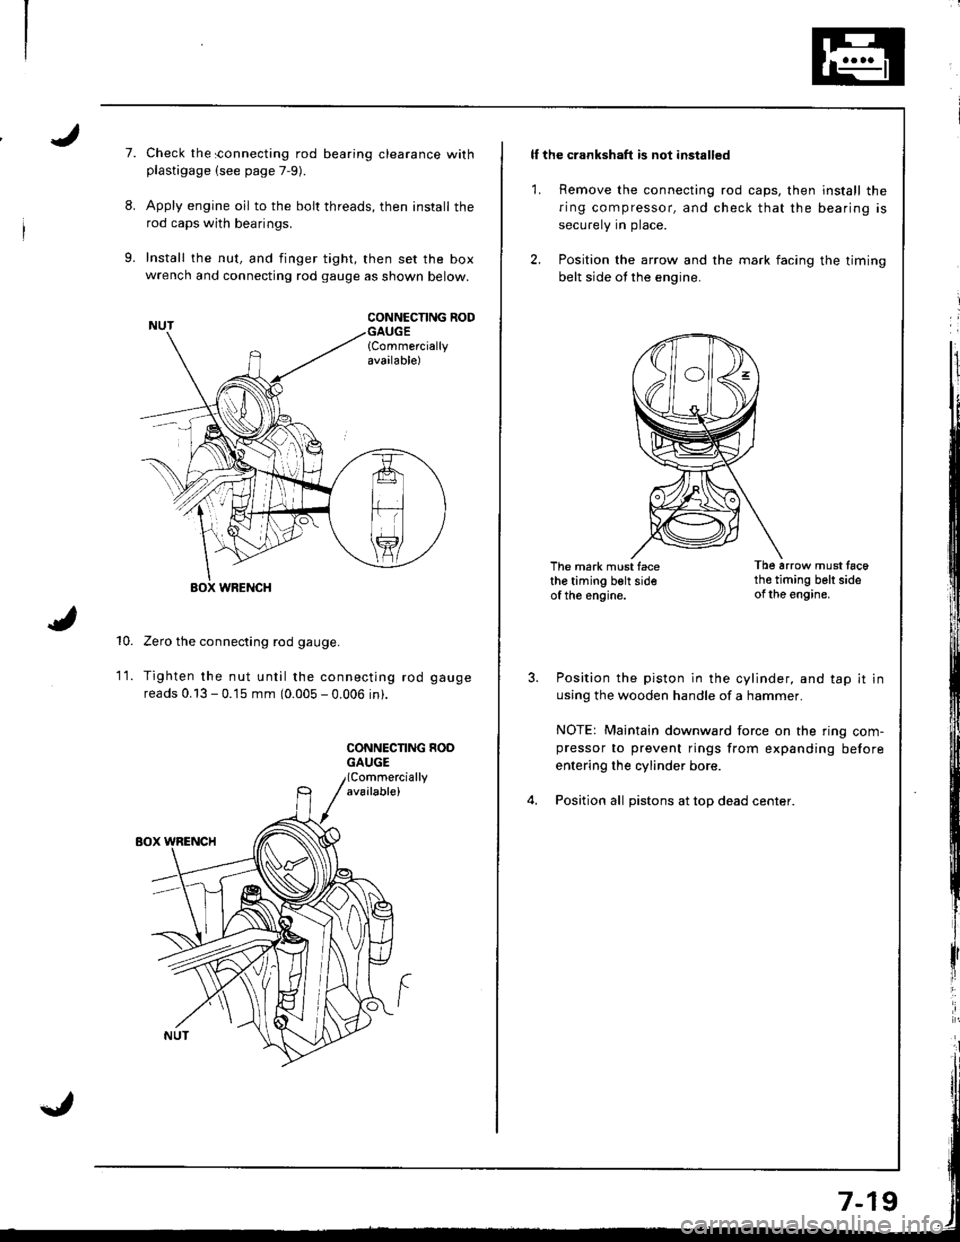 HONDA INTEGRA 1998 4.G Workshop Manual I
7.
8.
9.
Check the sonnecting rod bearing clearance withplastigage (see page 7-9).
Apply engine oil to the bolt threads, then install the
rod caps with bearings.
Install the nut, and finger tight, t